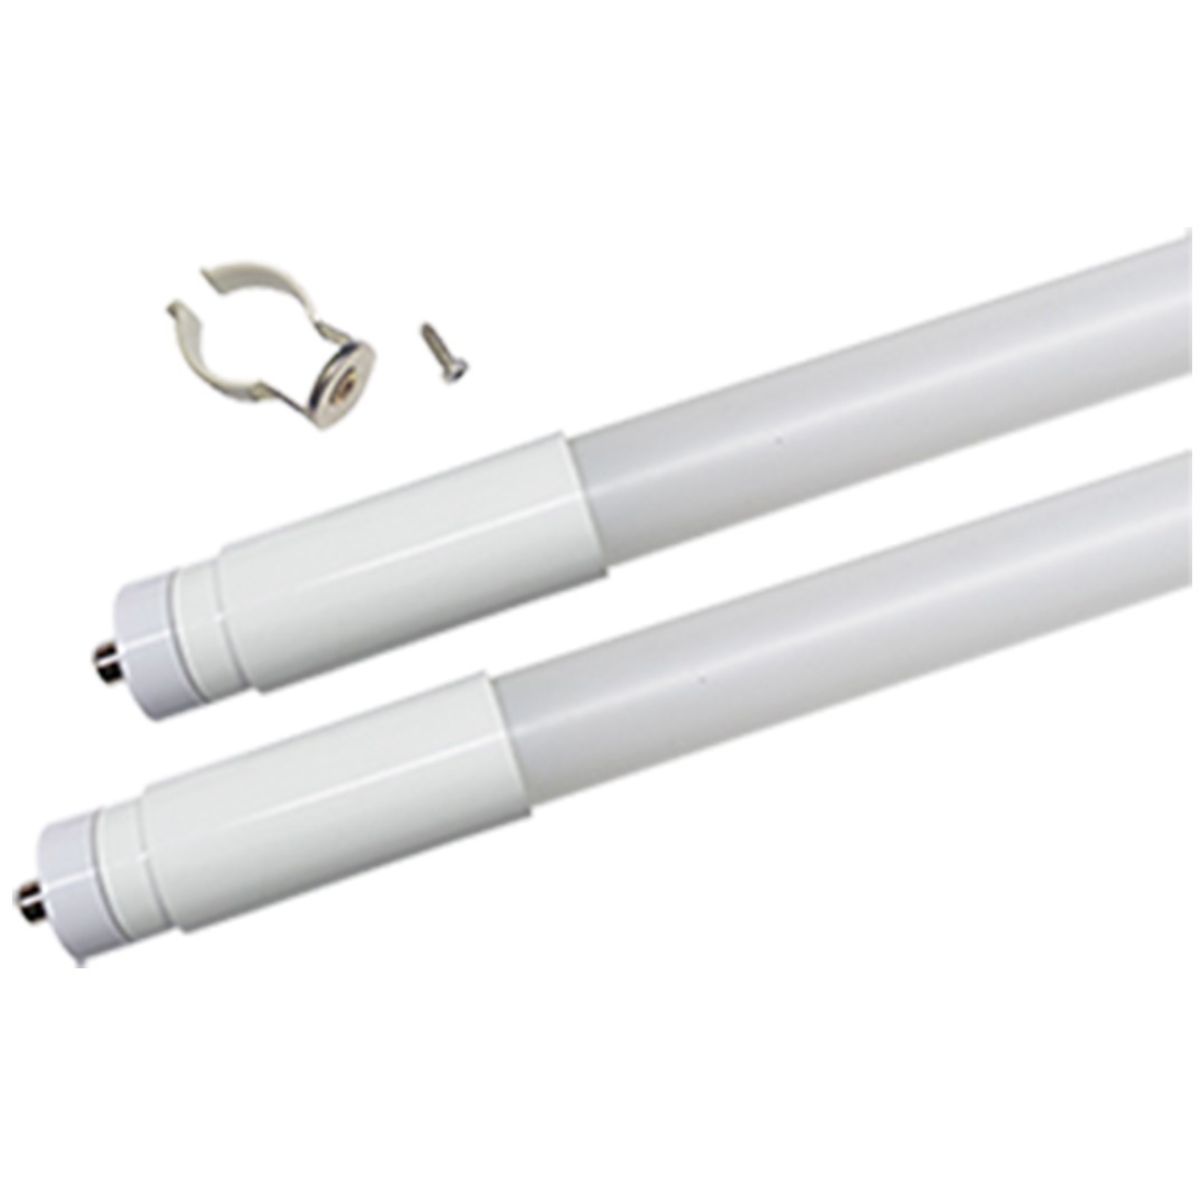 8ft T8 LED Bulb, 24 Watt, 3500 Lumens, 4000K, Glass, F96T8 Replacement, Fa8 base, Type A+B, Double End (Case Of 10)